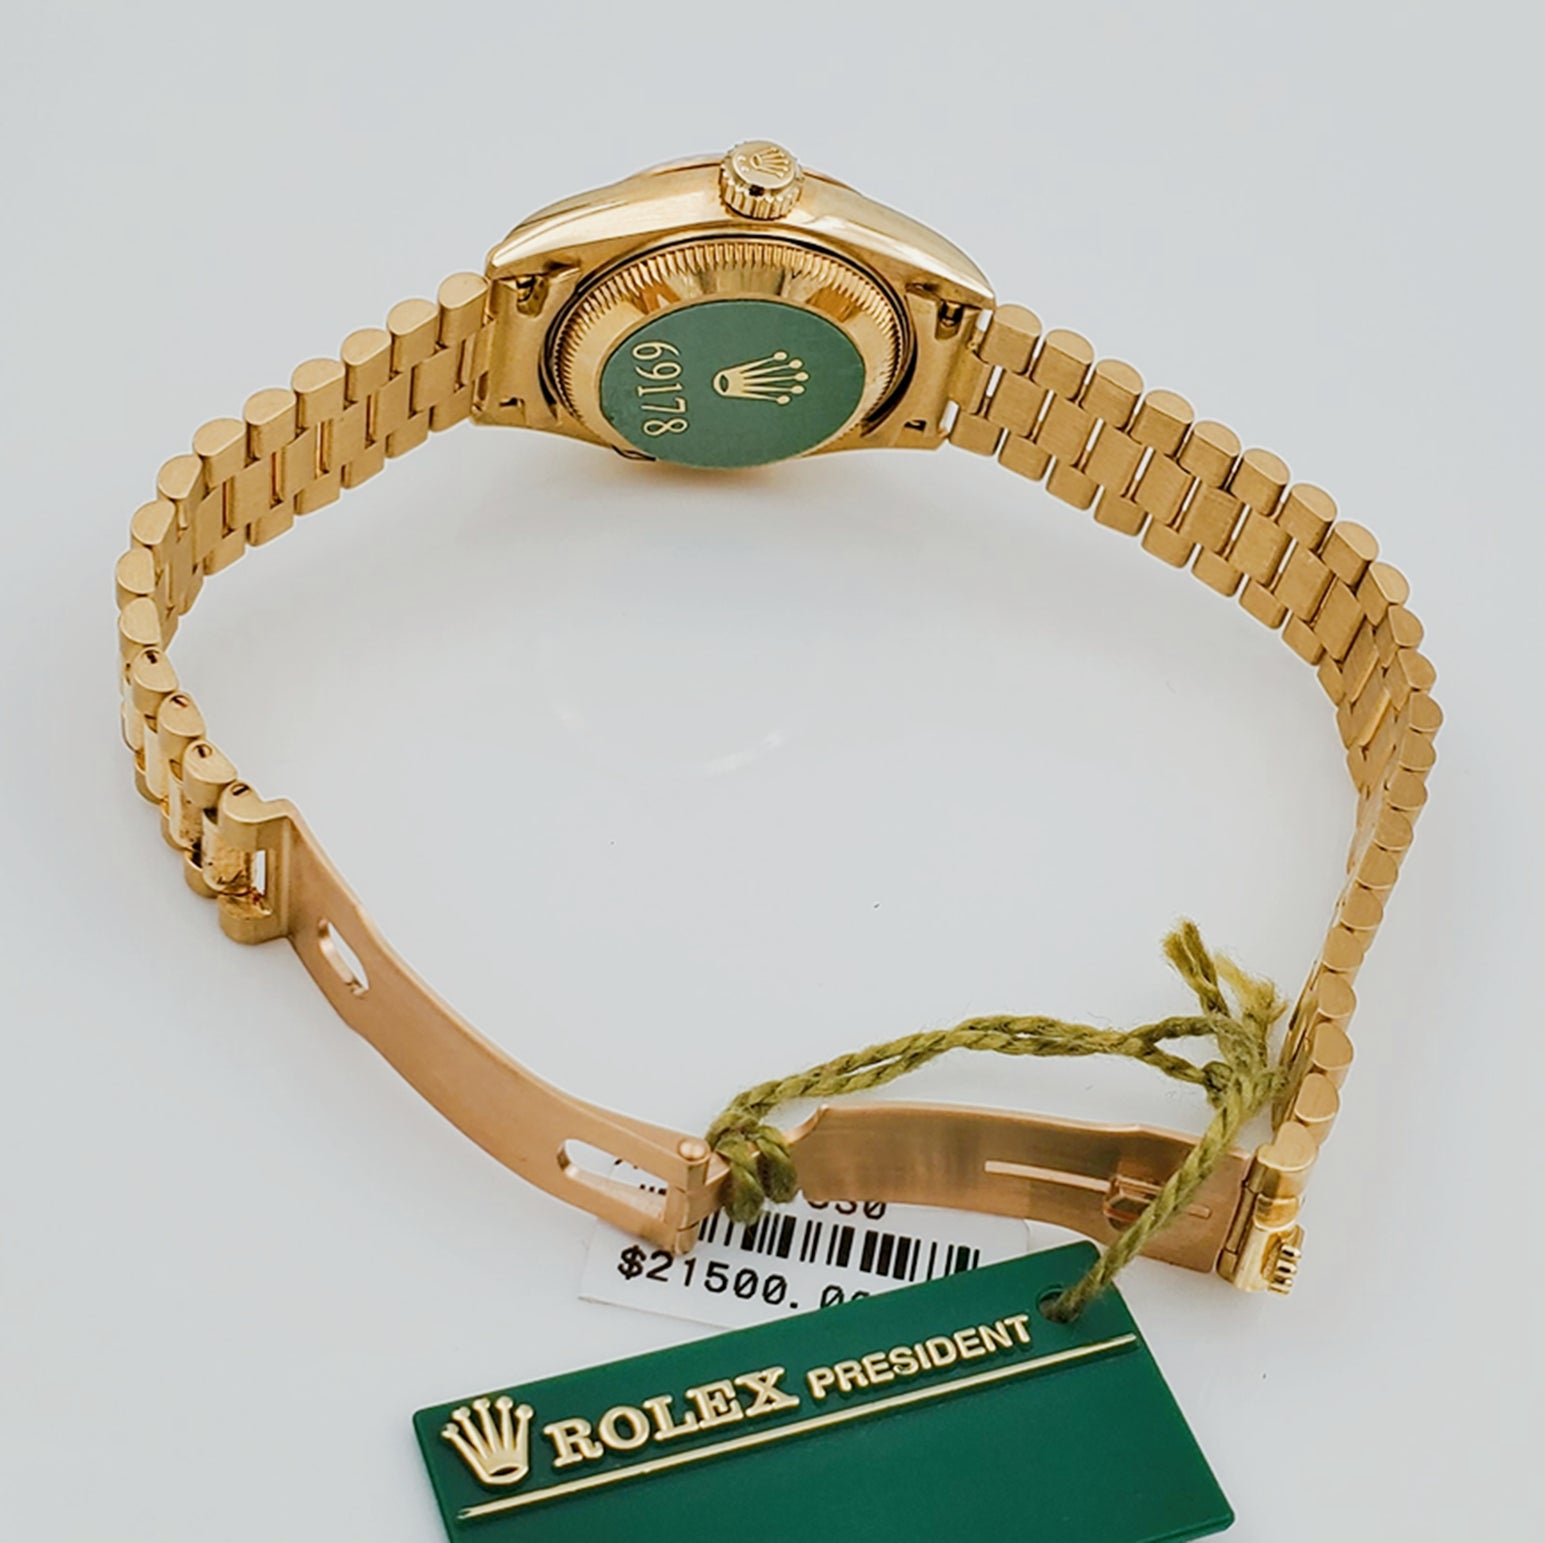 Ladies Rolex 26mm Presidential 18K Solid Yellow Gold Watch with Champagne Dial and Fluted Bezel. (NEW 69178)